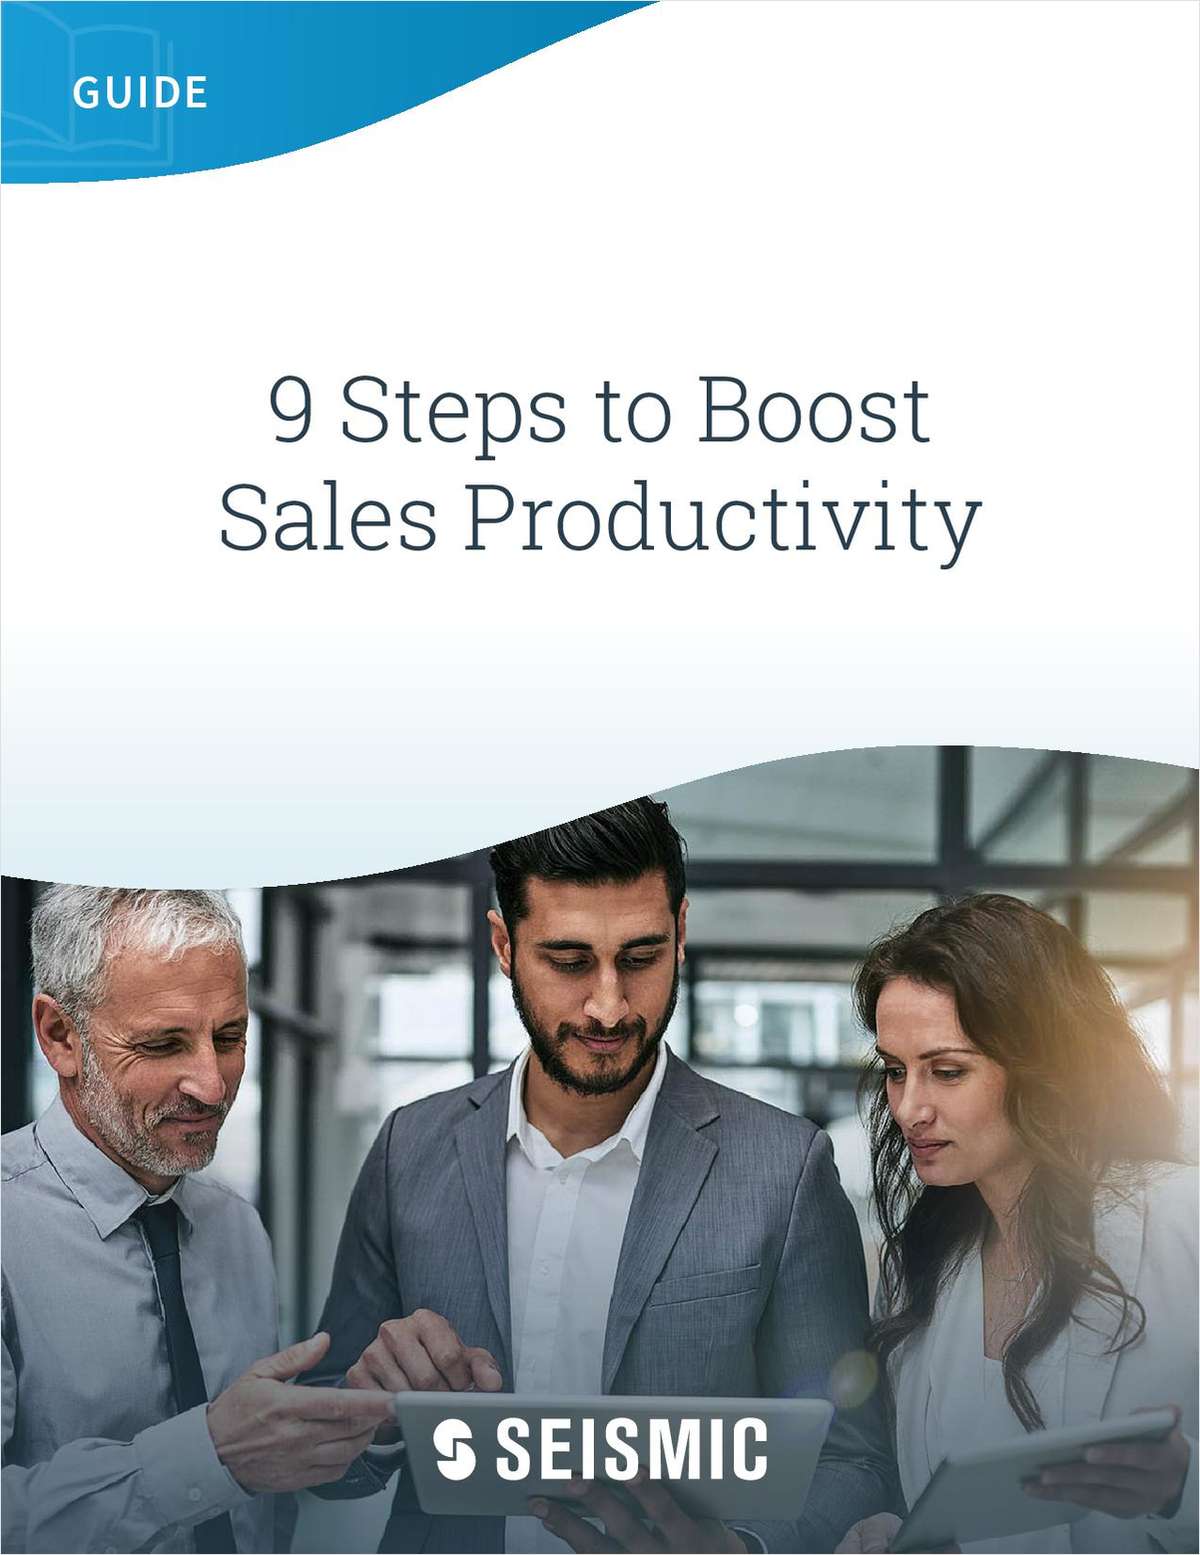 9 Steps to Boost Sales Productivity